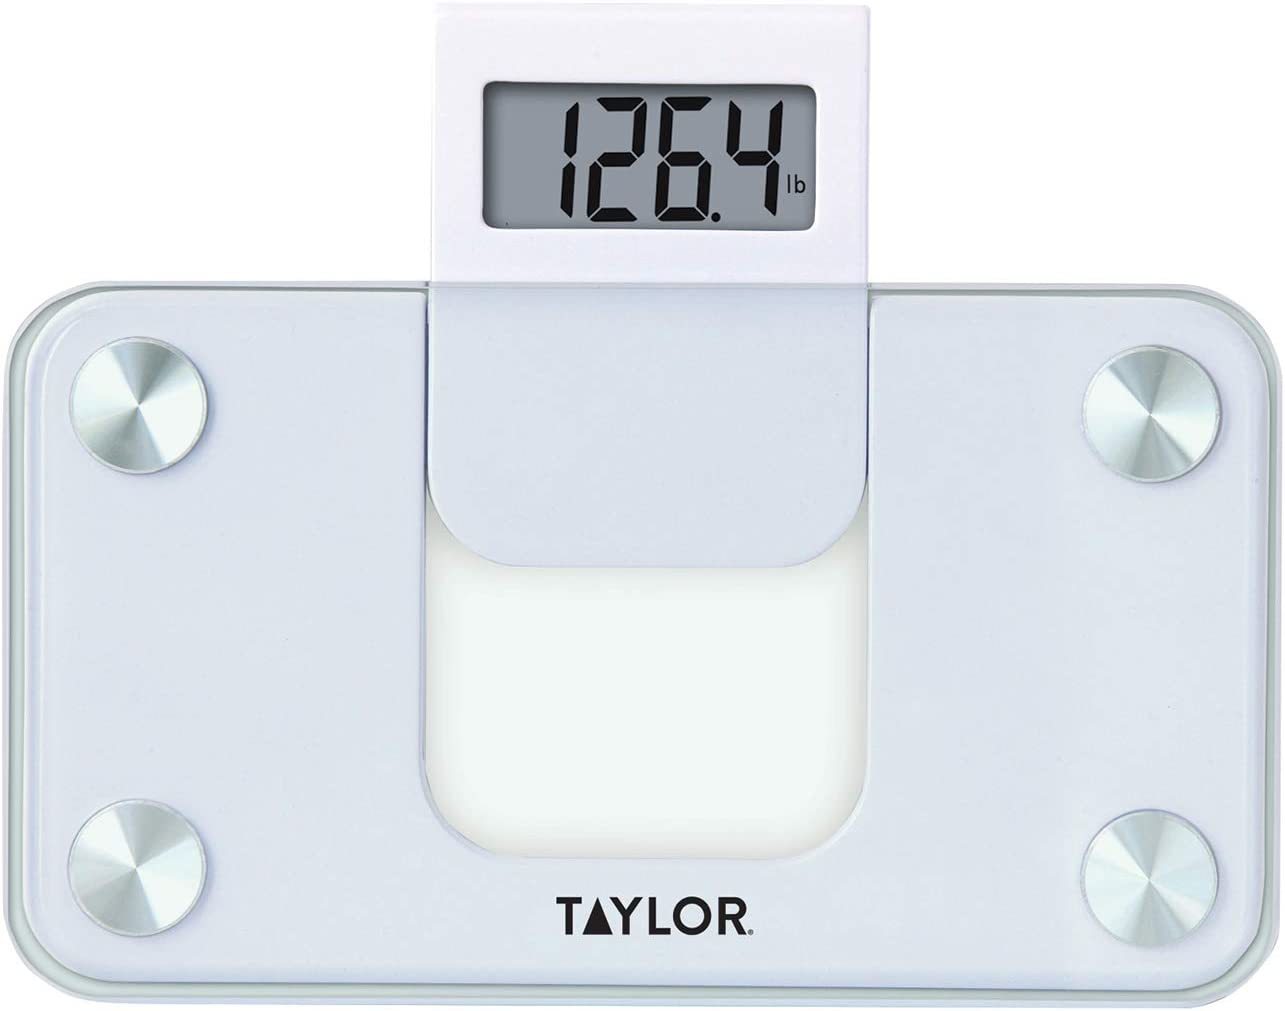 Primary image for Taylor Precision Products Digital 350Lb Capacity Mini Scale, Expandable, Glass